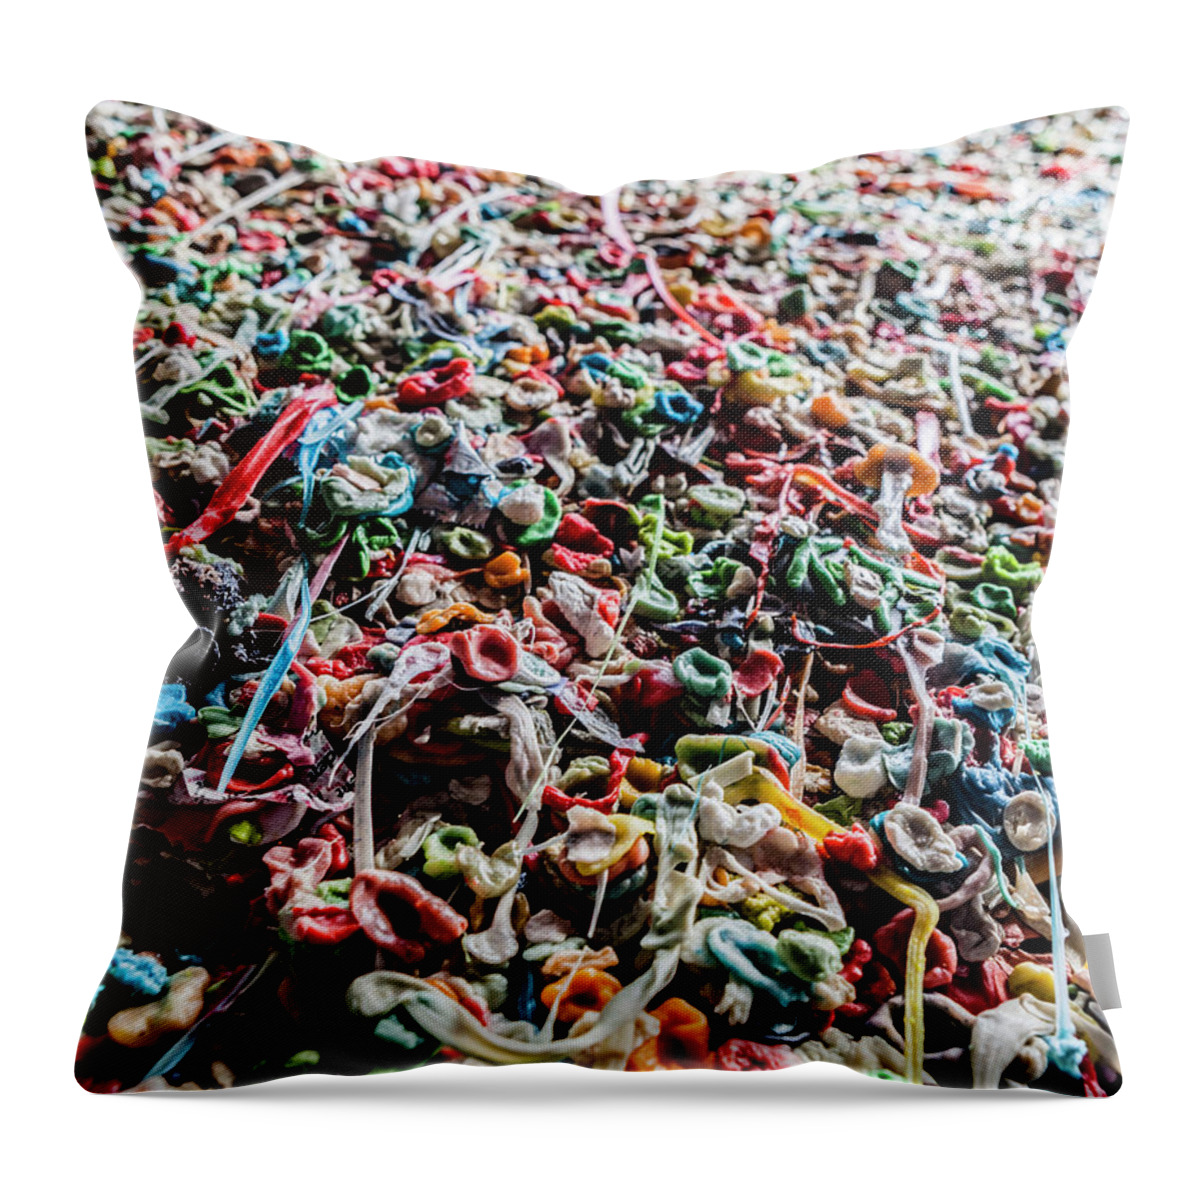 Alley Throw Pillow featuring the photograph Gum Wall by Ron Koeberer